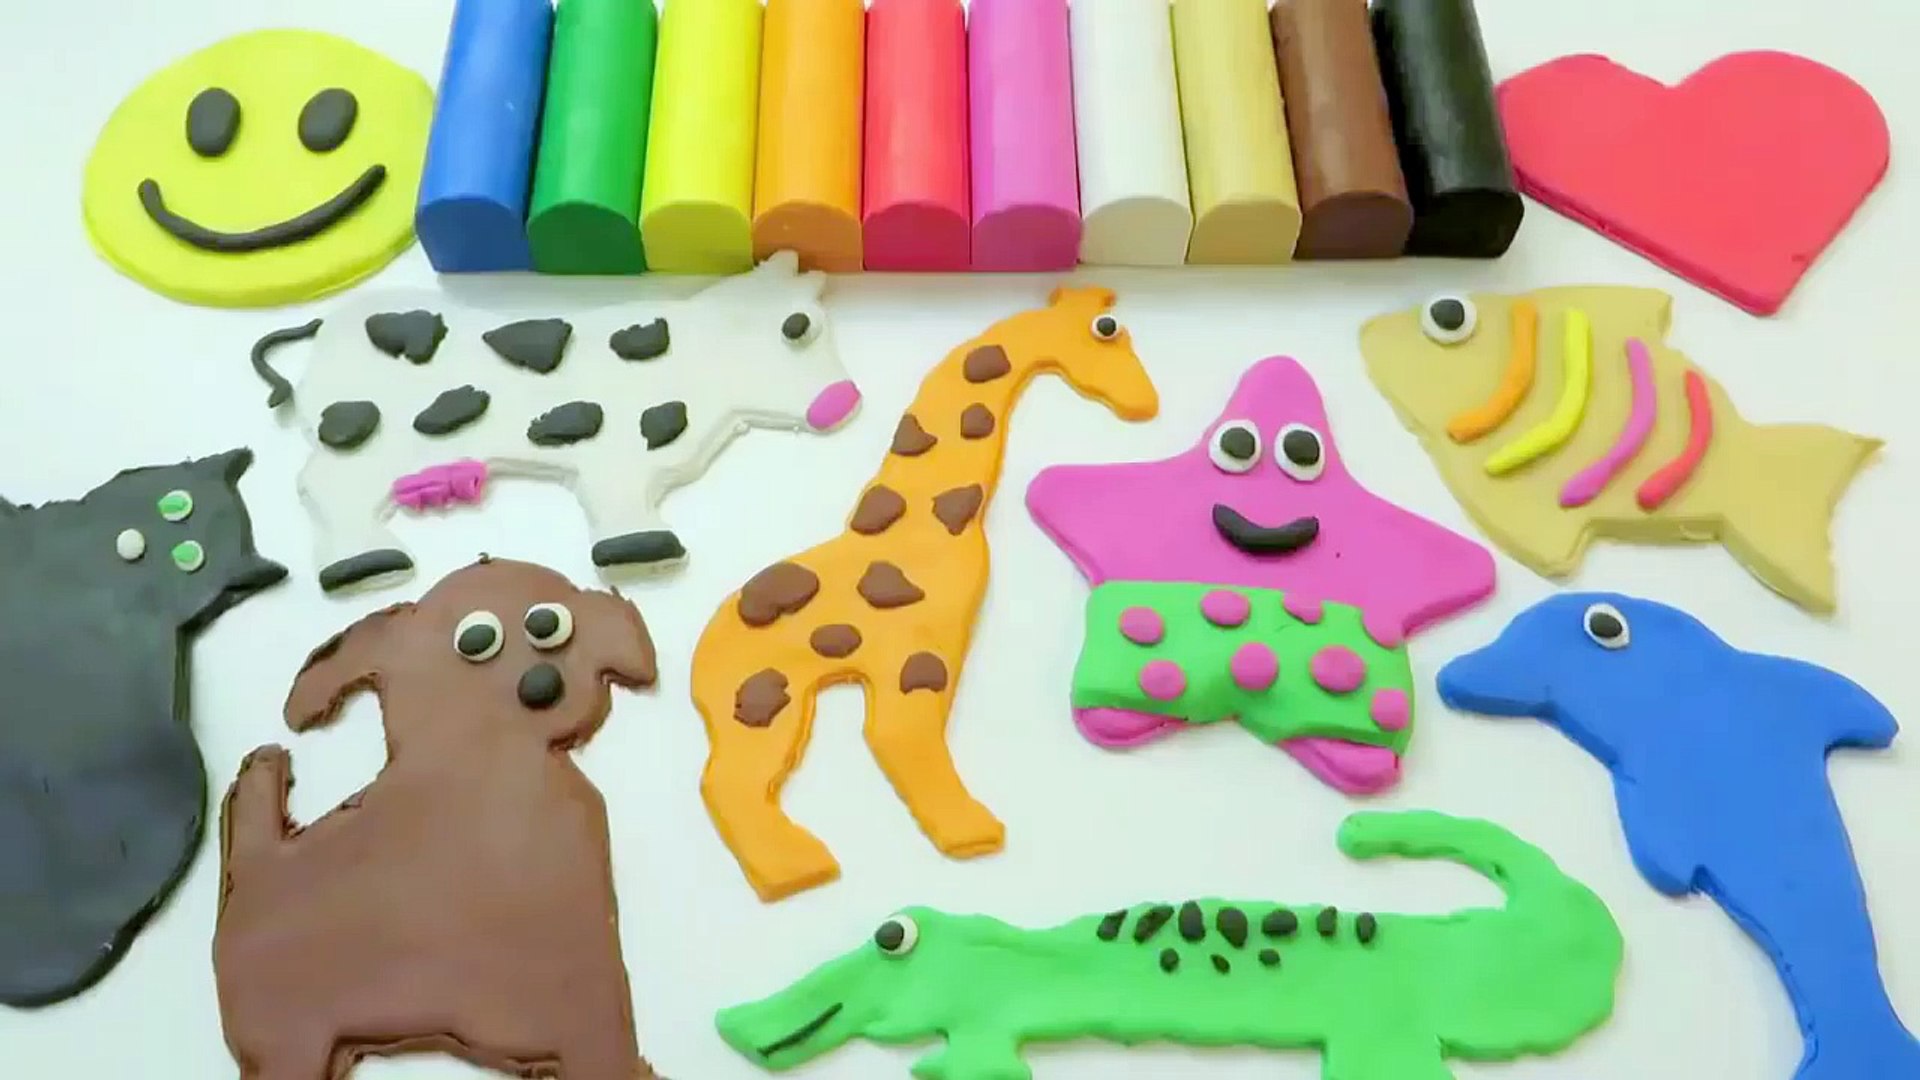 Learn Colors and Animals Play-Doh Creative Fun with Modeling Clay Educational Video for Kids